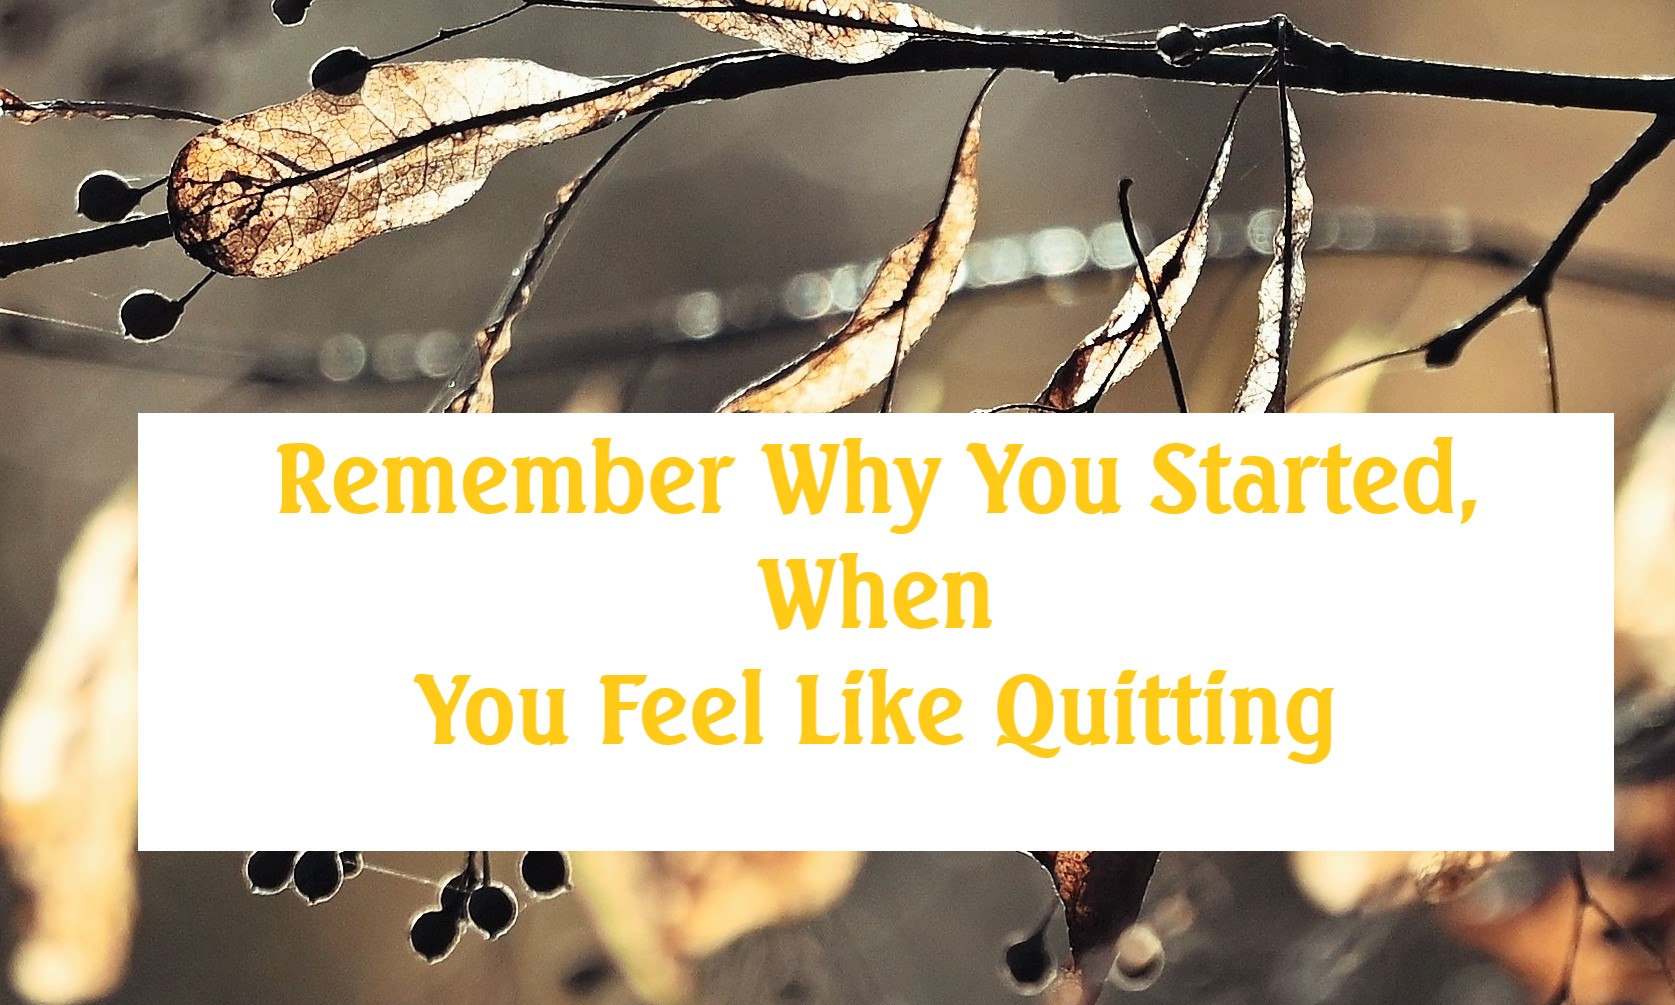 Remember Why You Started, When You Feel Like Quitting